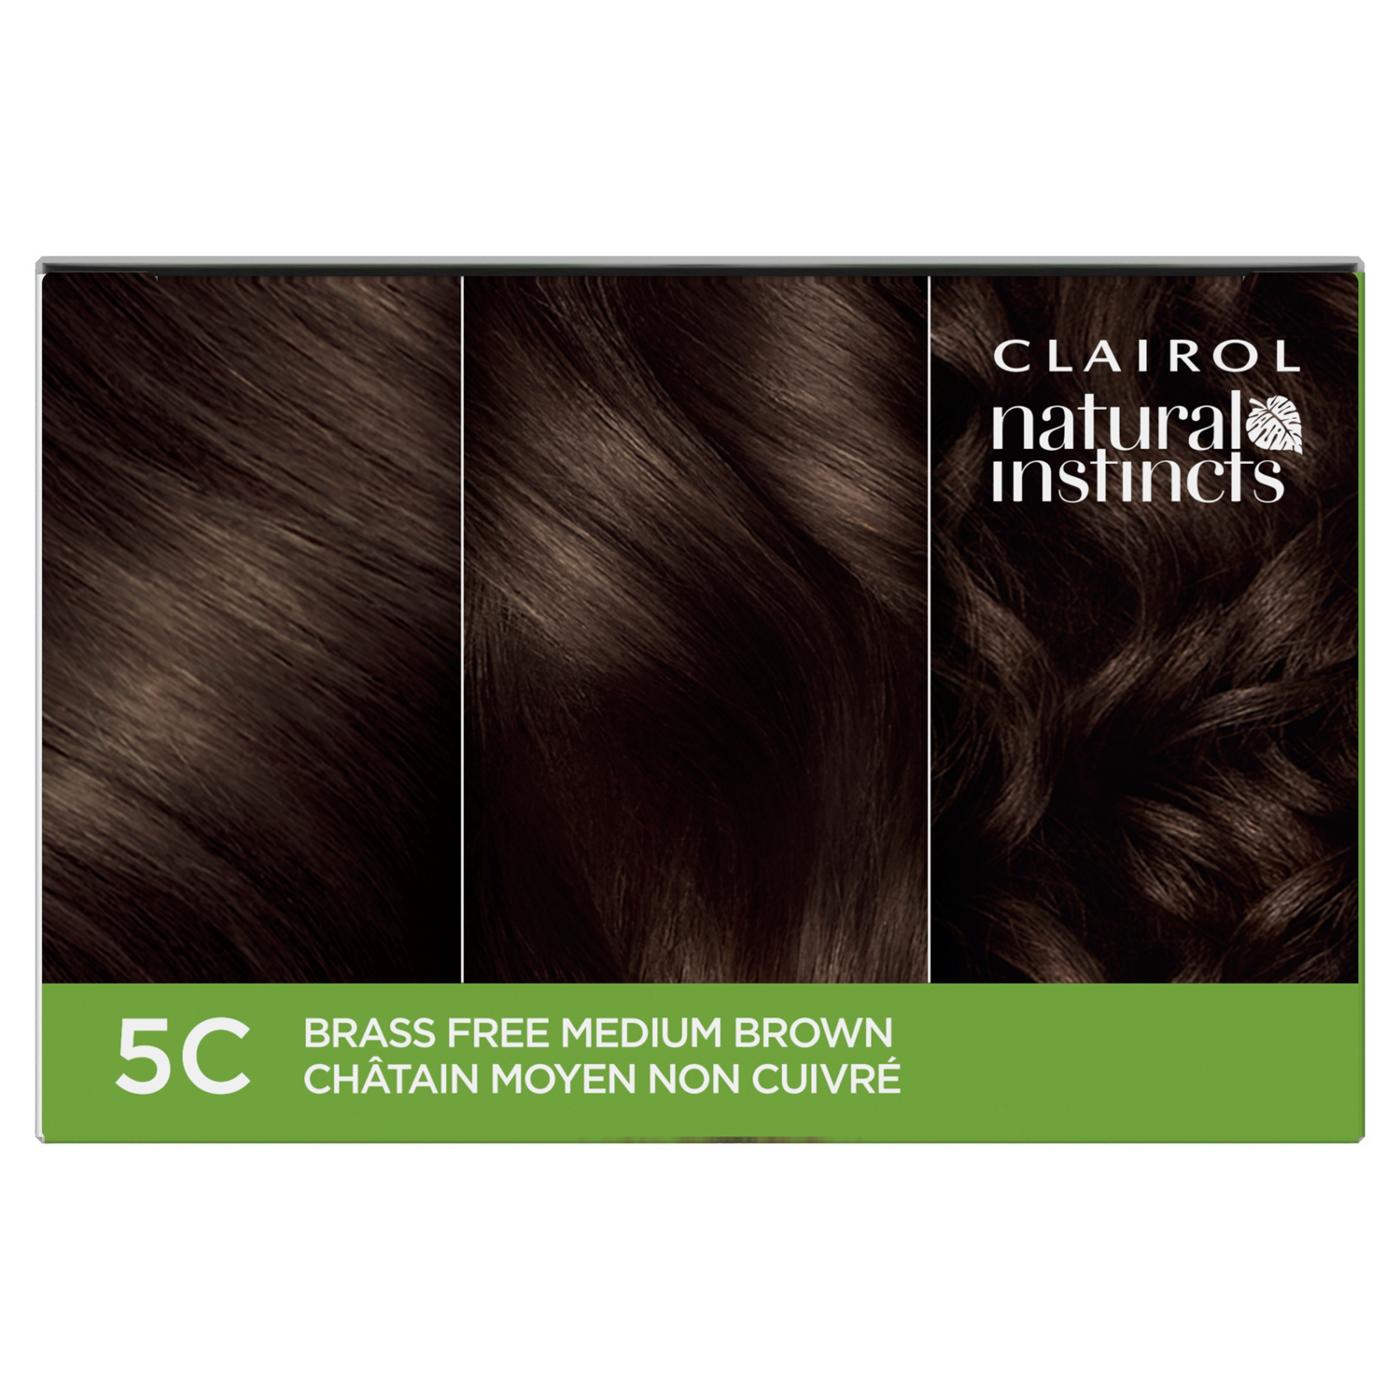 Clairol Natural Instincts Vegan Demi-Permanent Hair Color - 5C Brass Free Med Brown; image 8 of 10